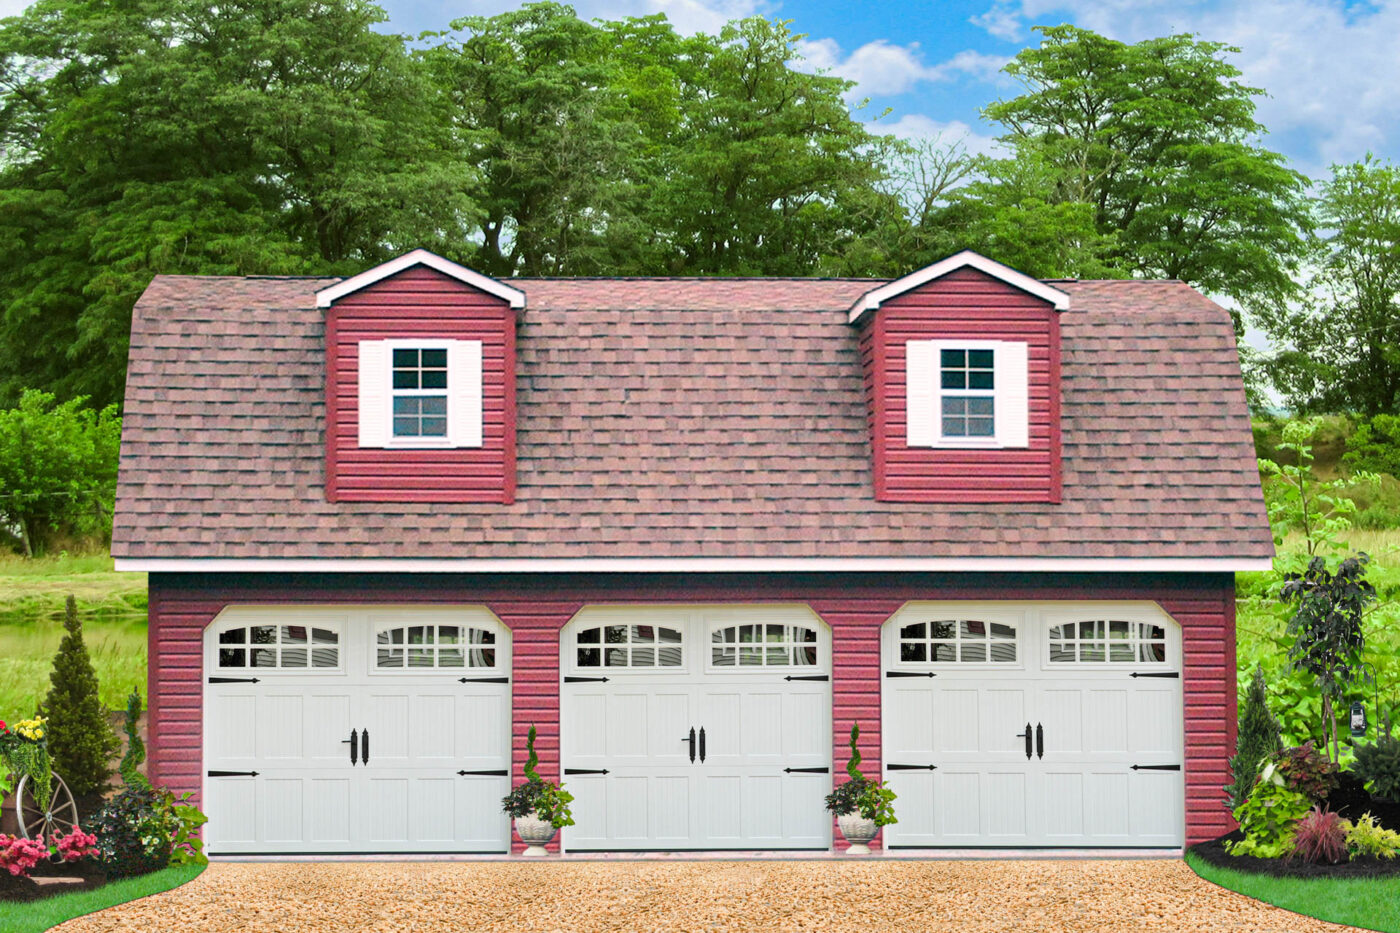 3 car garage for sale in NY 3